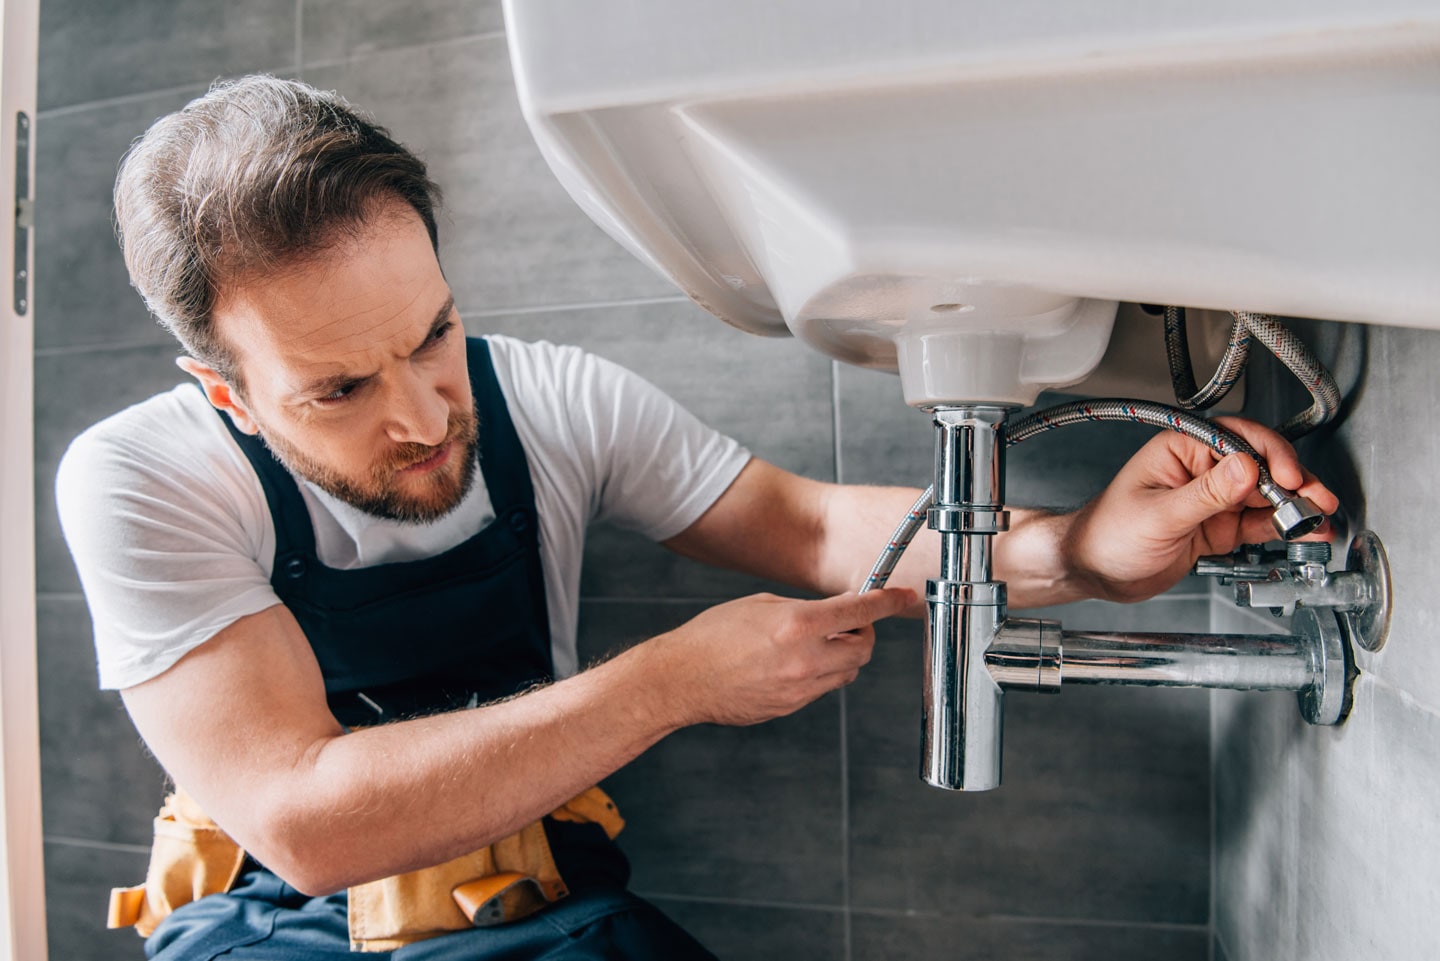 Commercial Plumbing Services in Saint Louis MO